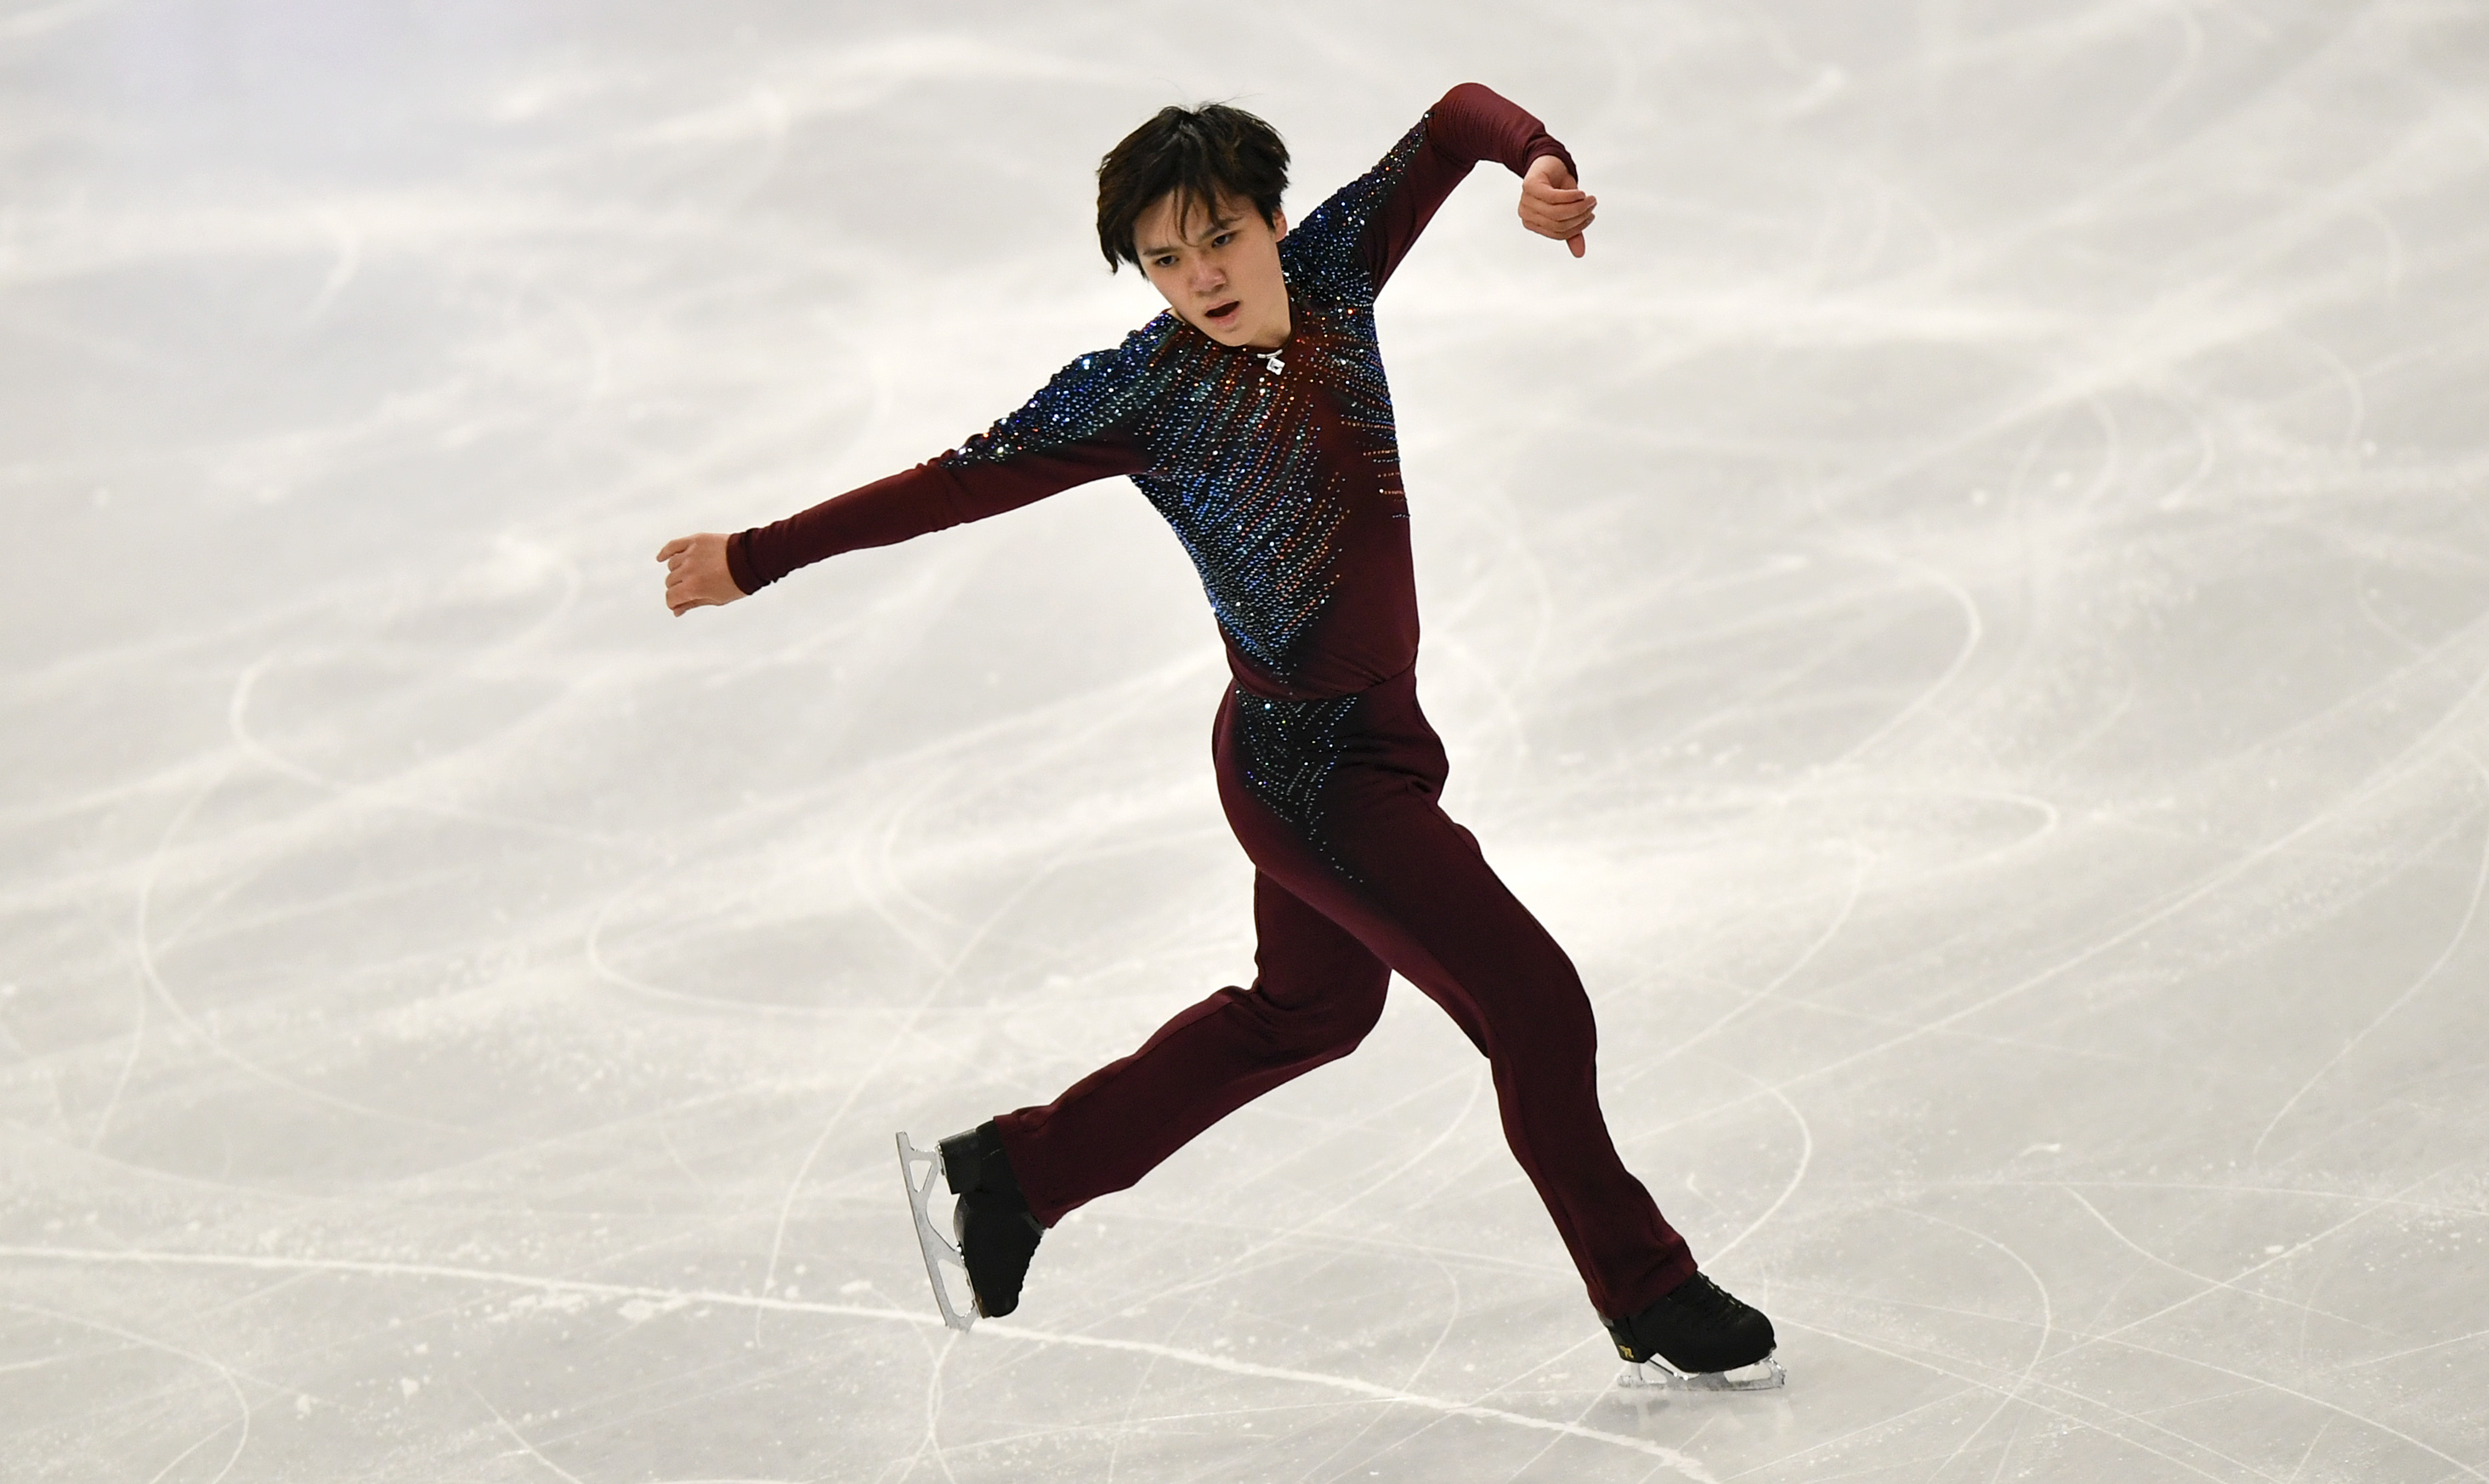 World Figure Skating Championships 2021 Live stream, TV schedule, how to watch Day 2, Nathan Chen in Mens Short